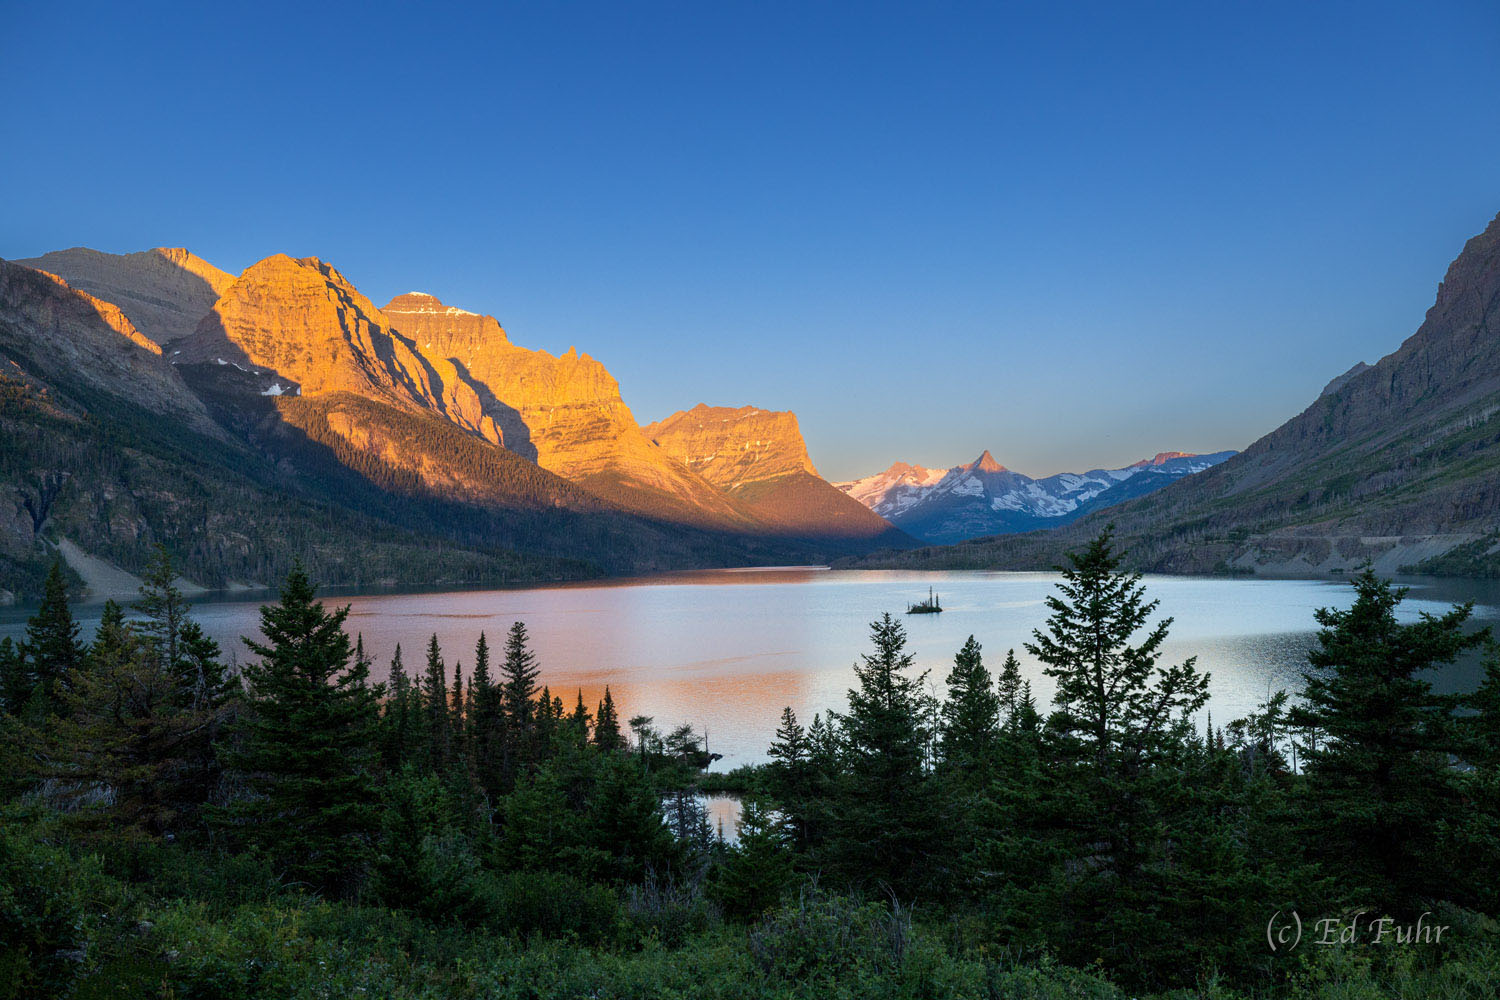 Early summer brings clear skies and a warm sunrise to Wild Goose Island.